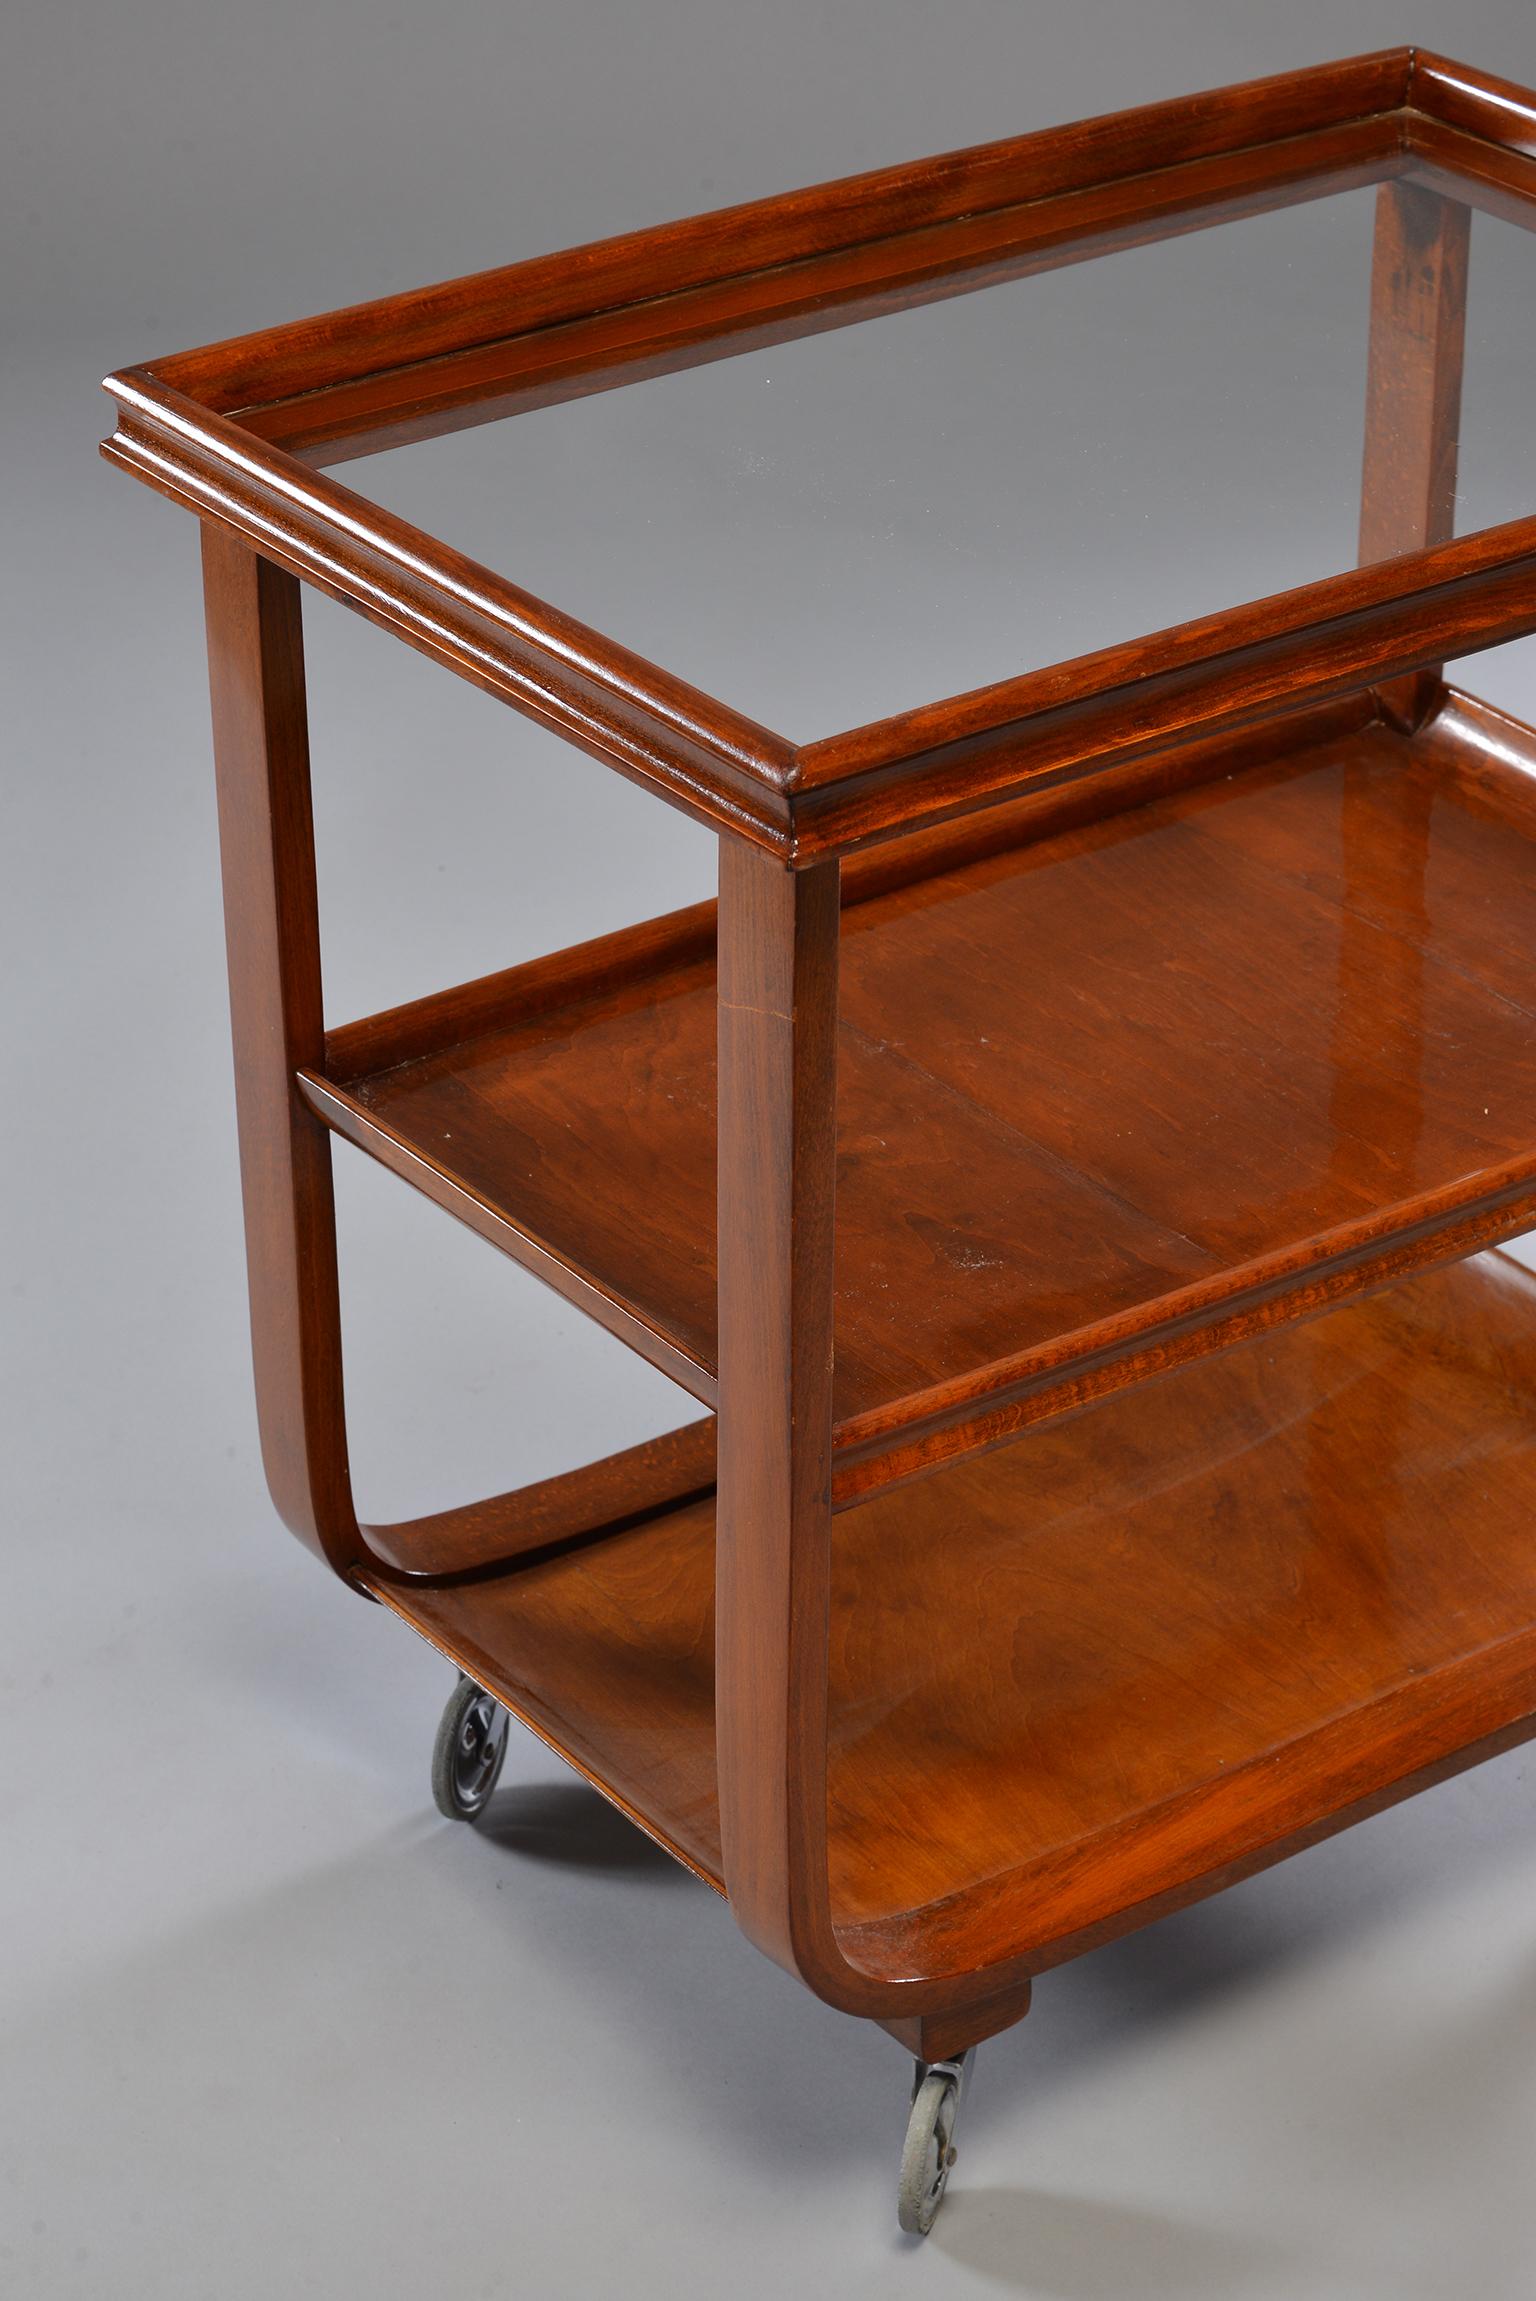 20th Century English Wooden Bar or Tea Trolley with Removable Tray